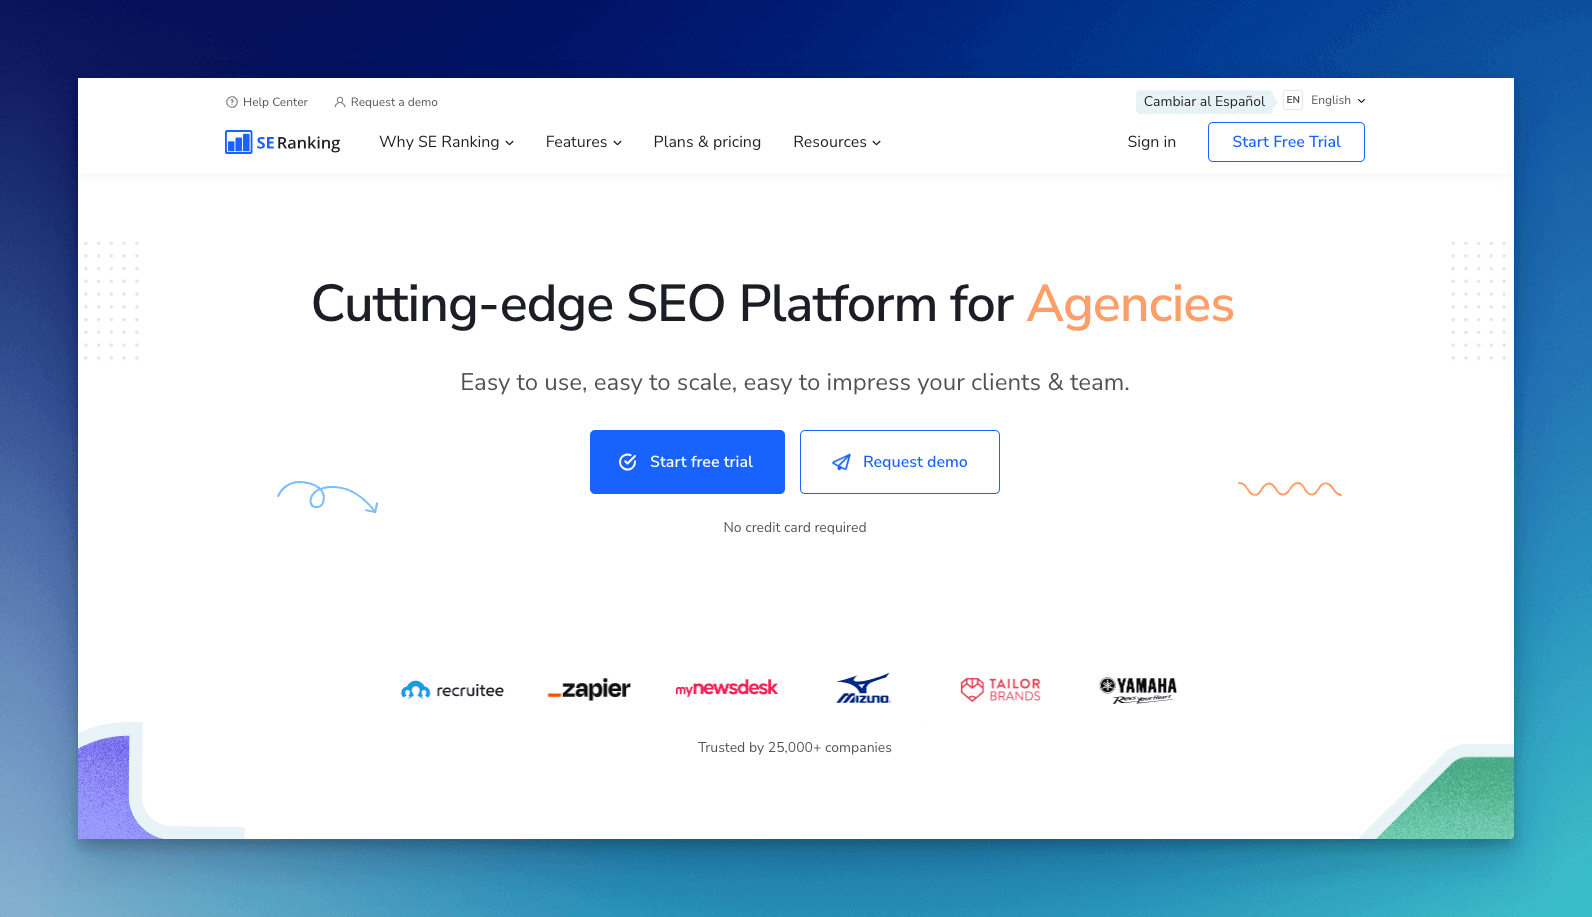 SE Ranking seo crawler tool homepage with a copy that says "cutting edge SEO platform for agencies"